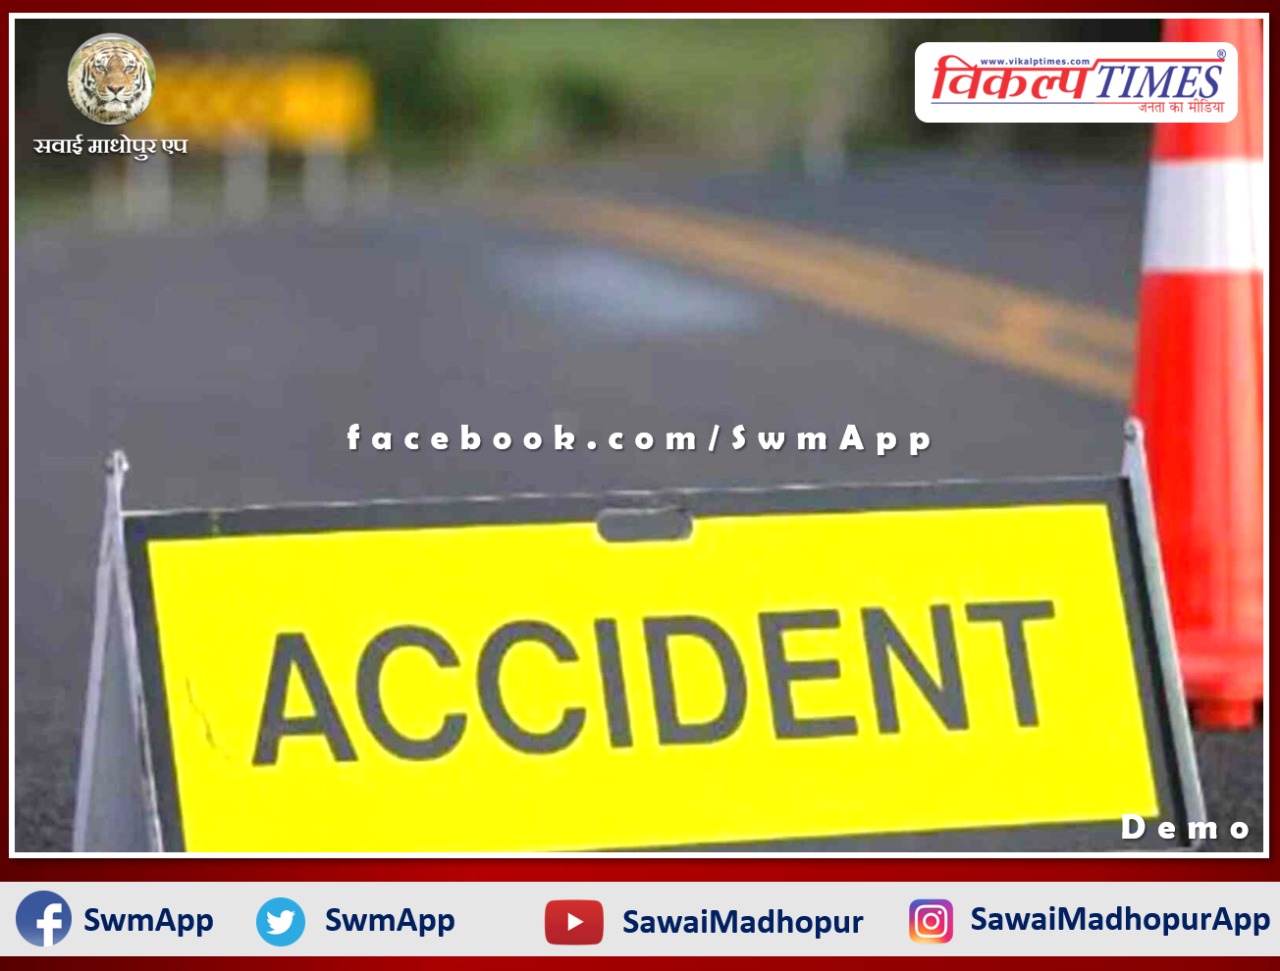 Horrific road accident in bonli, 3 people died in the accident